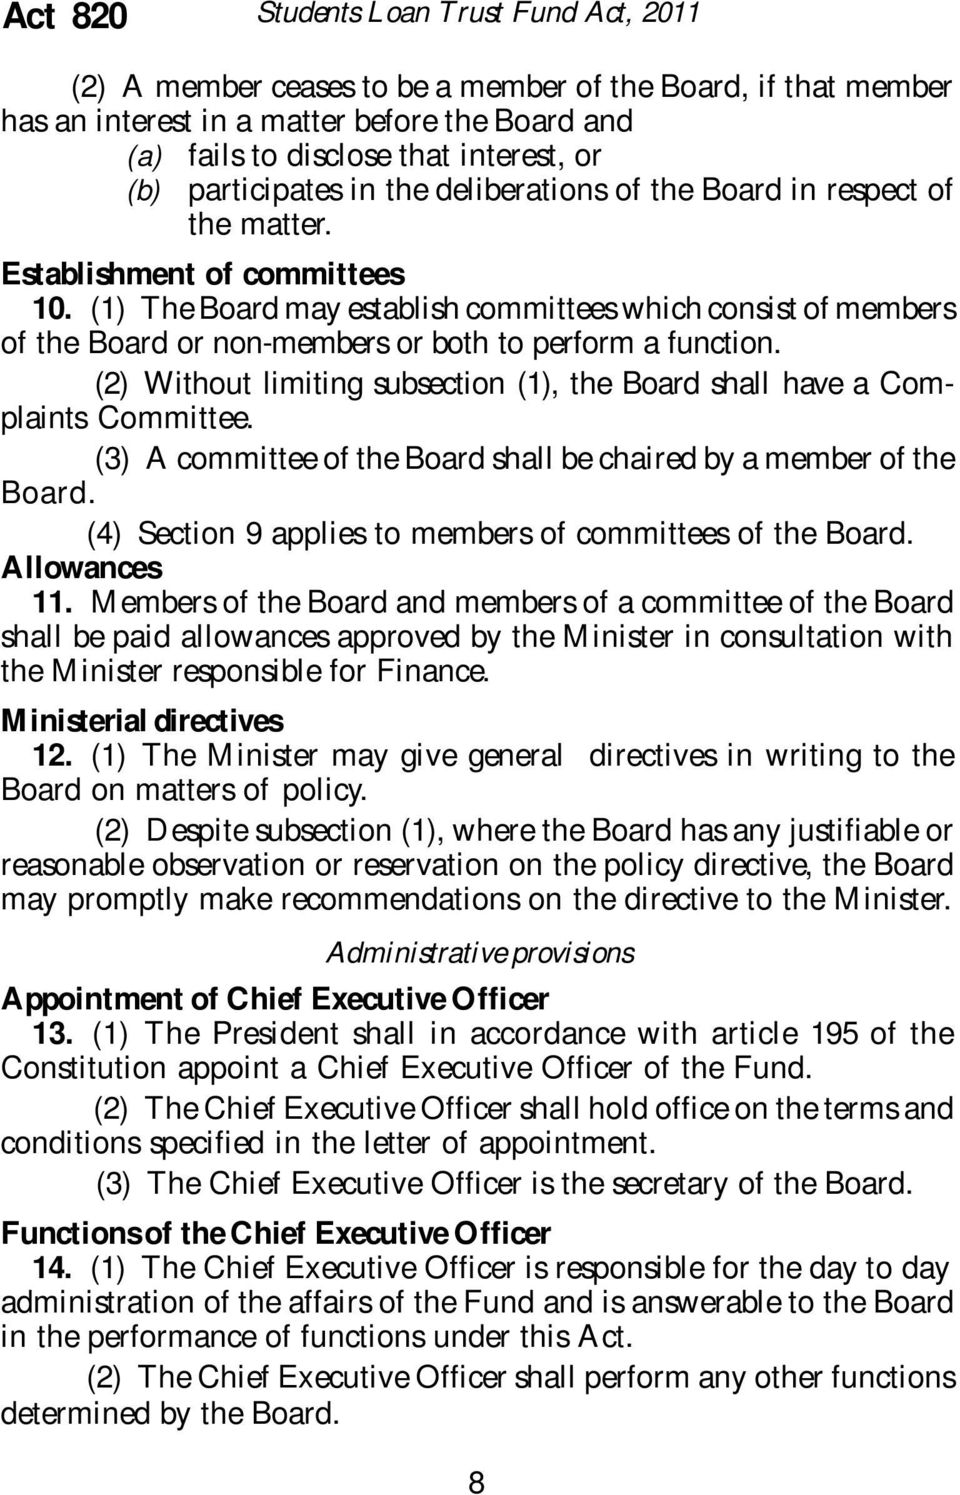 (1) The Board may establish committees which consist of members of the Board or non-members or both to perform a function.